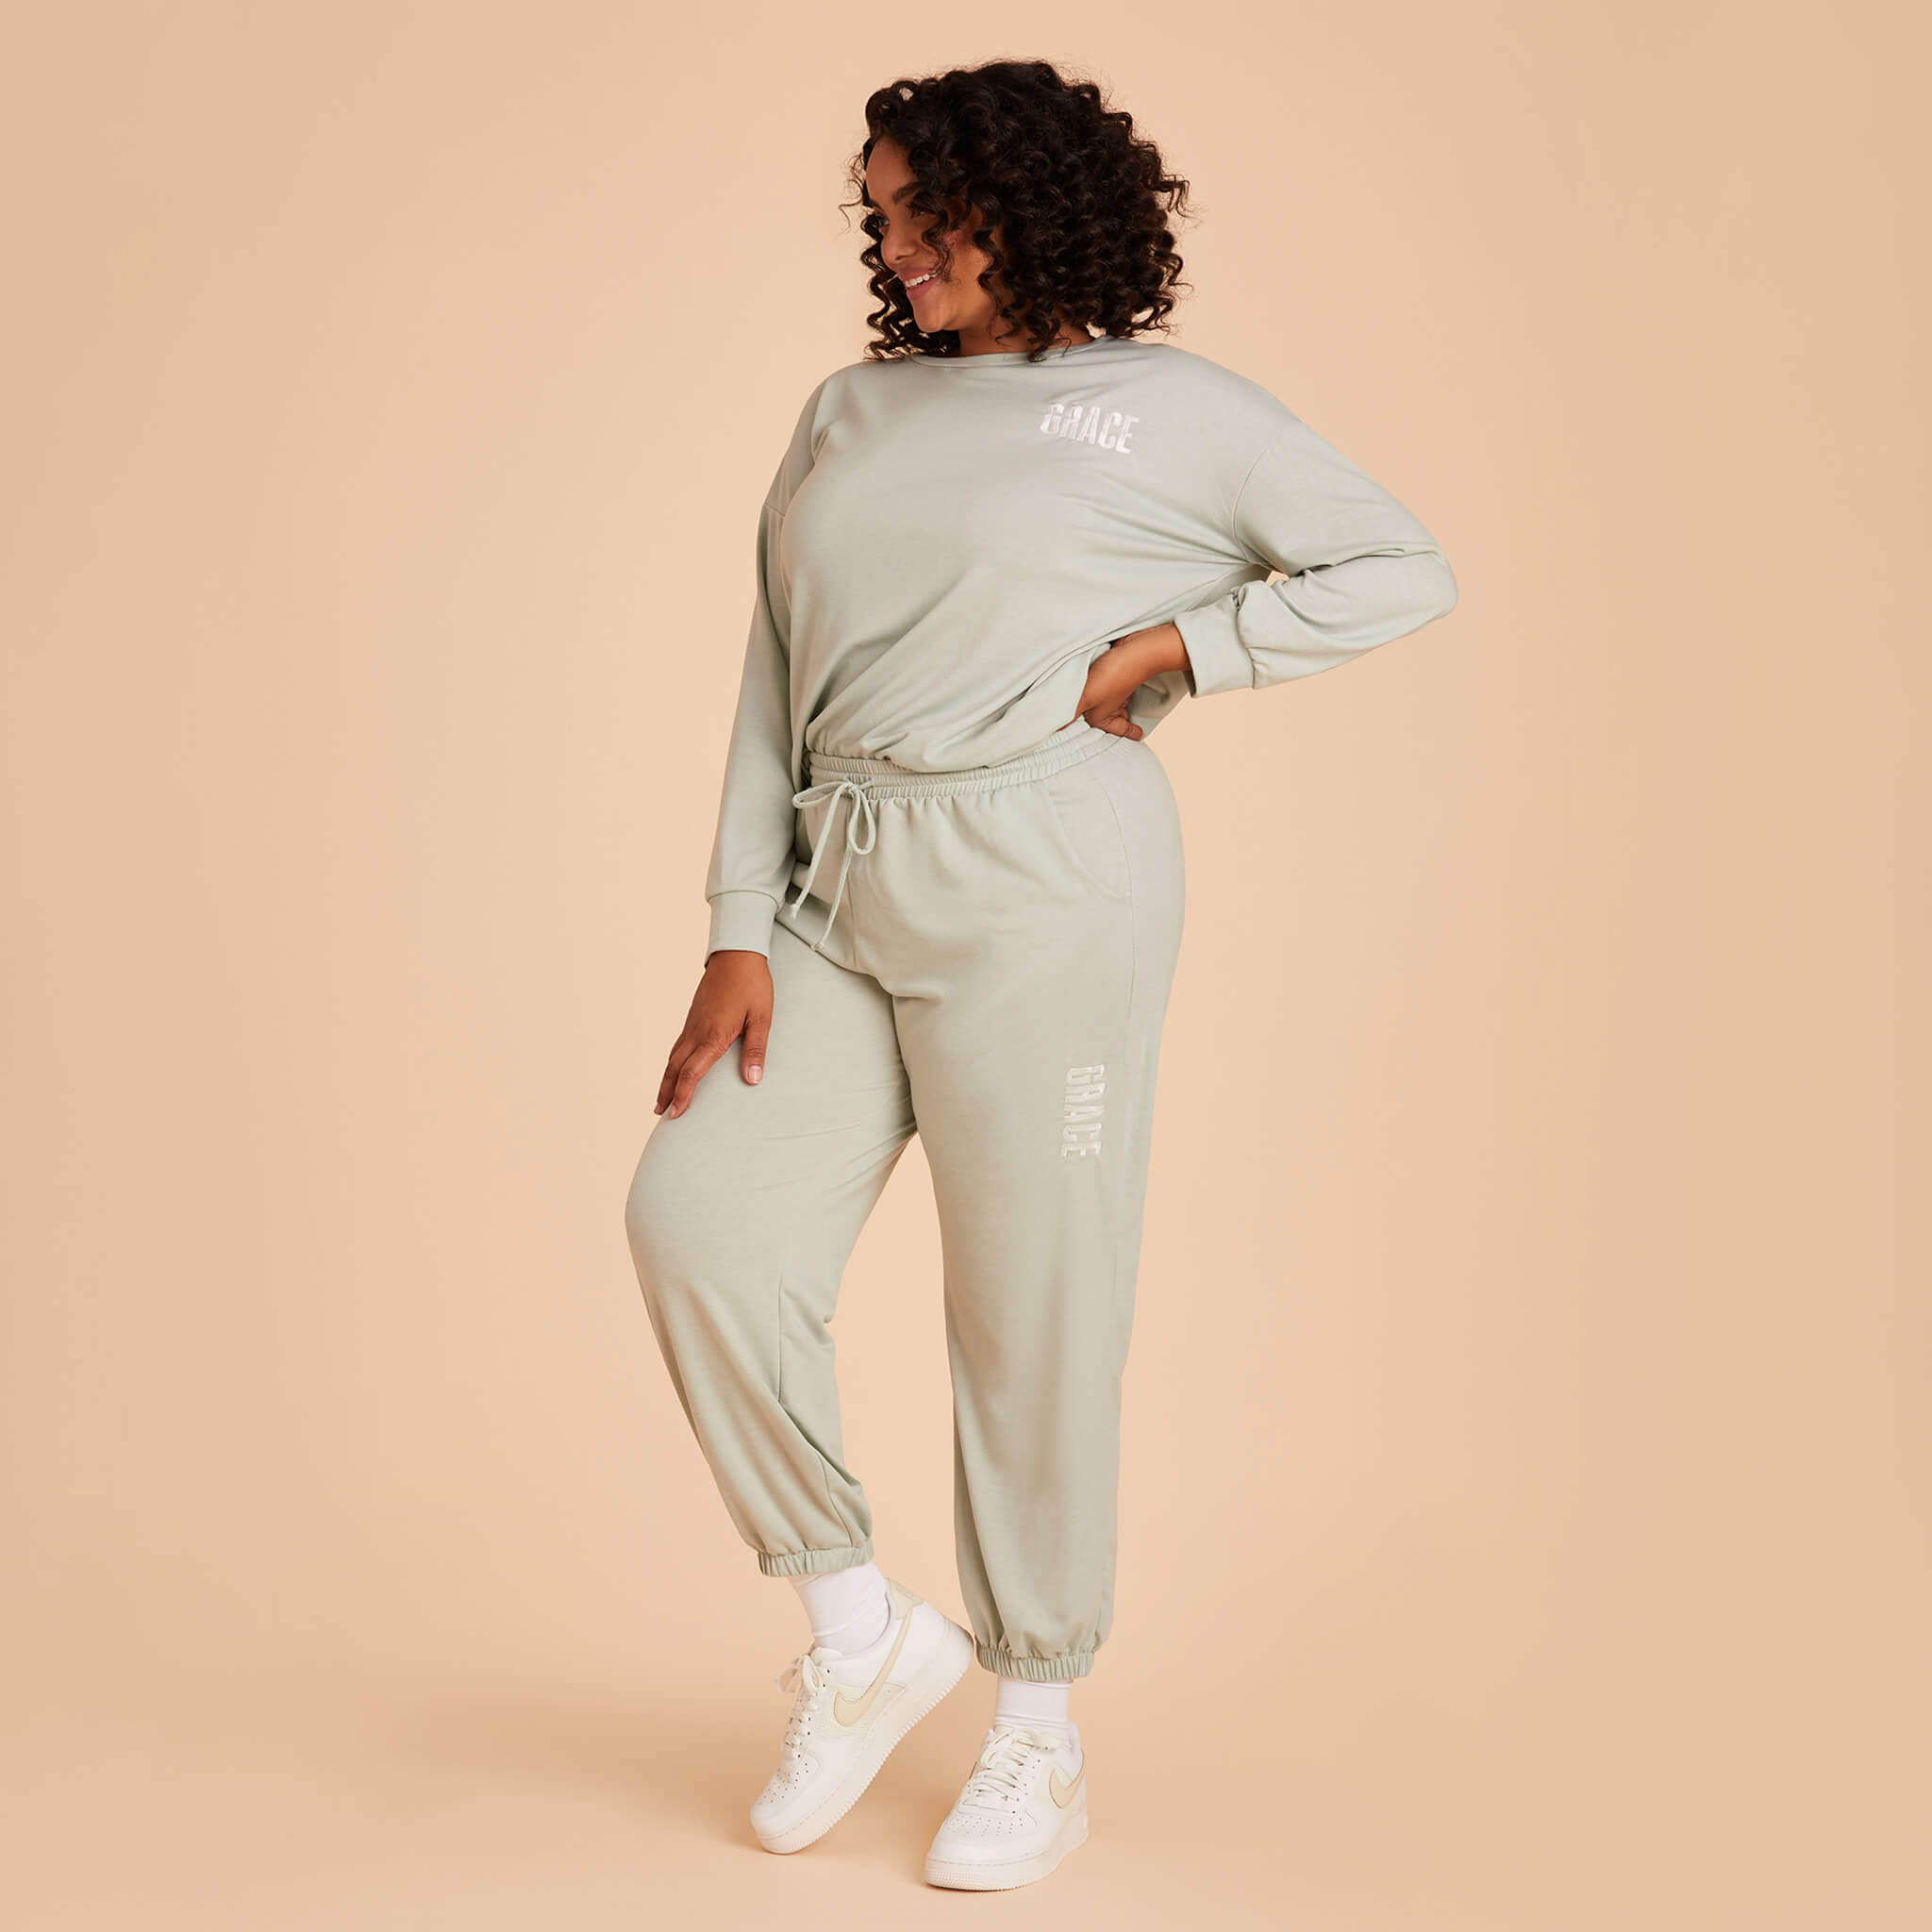 Plus Size sweatpants and crew neck in Sage Light Green with personalization